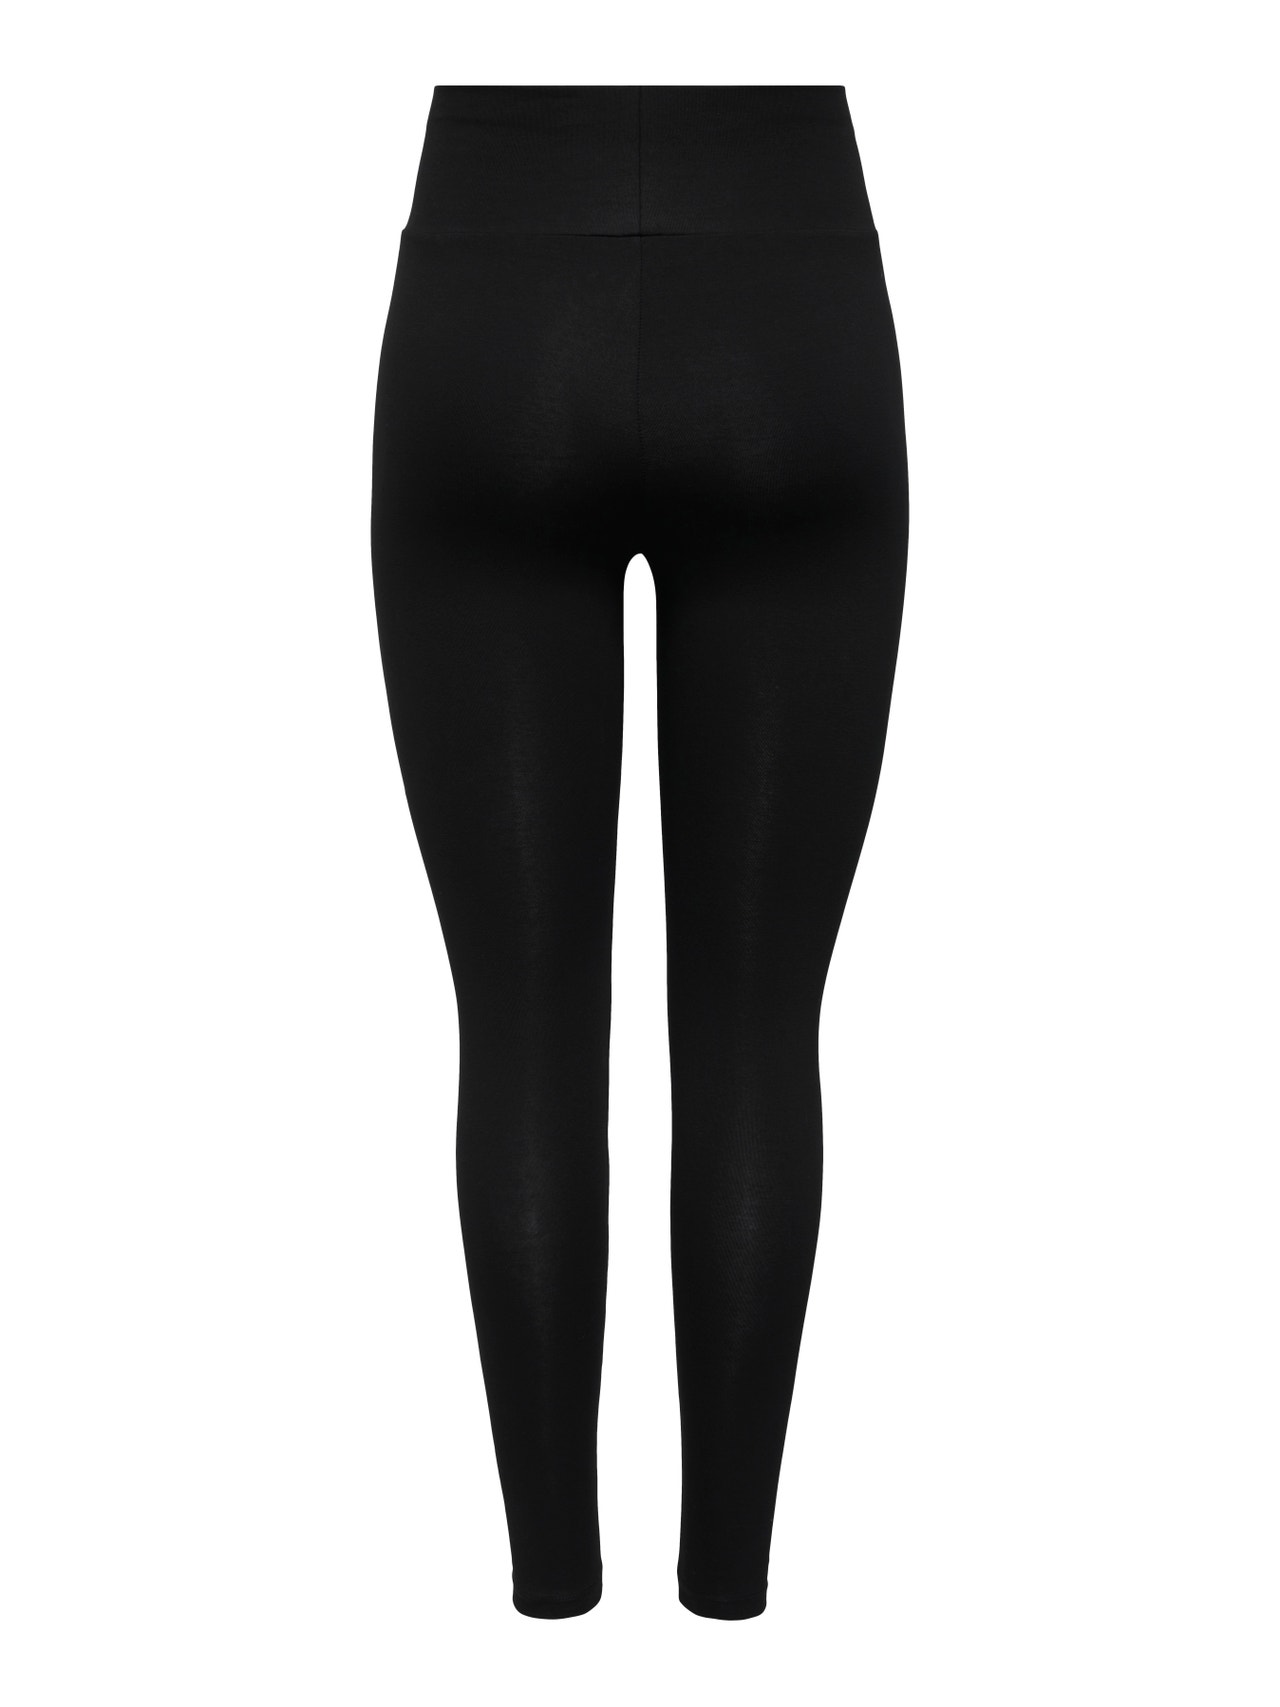 Sports tights with high waist, Black